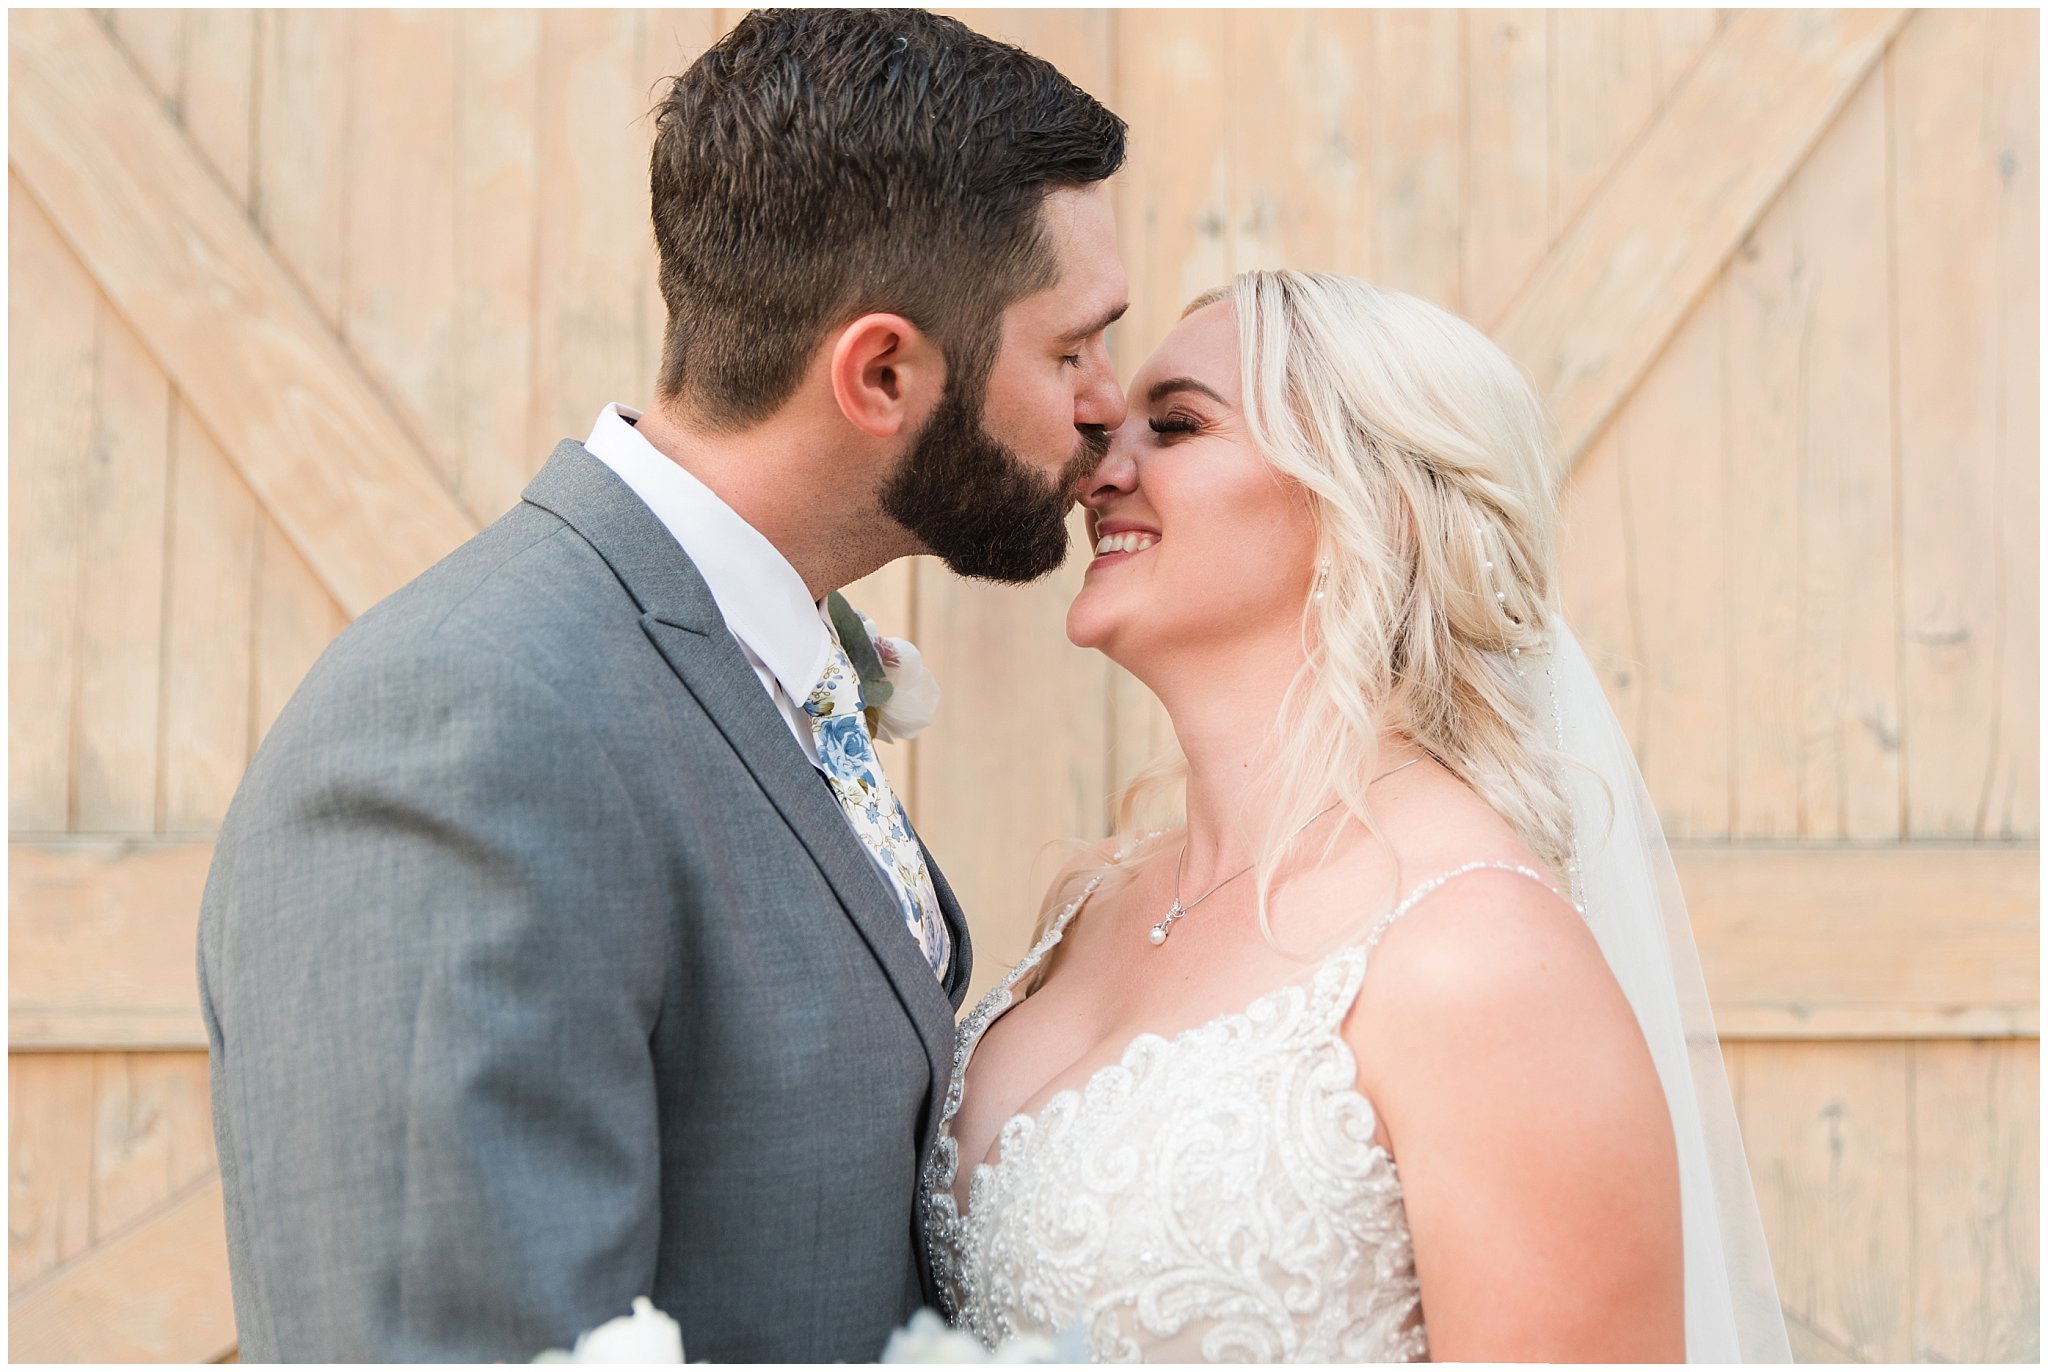 Bride and groom portraits with lace dress and cathedral veil and gray suit with blue floral tie | Dusty Blue and Rose Summer Wedding at Oak Hills Utah | Jessie and Dallin Photography